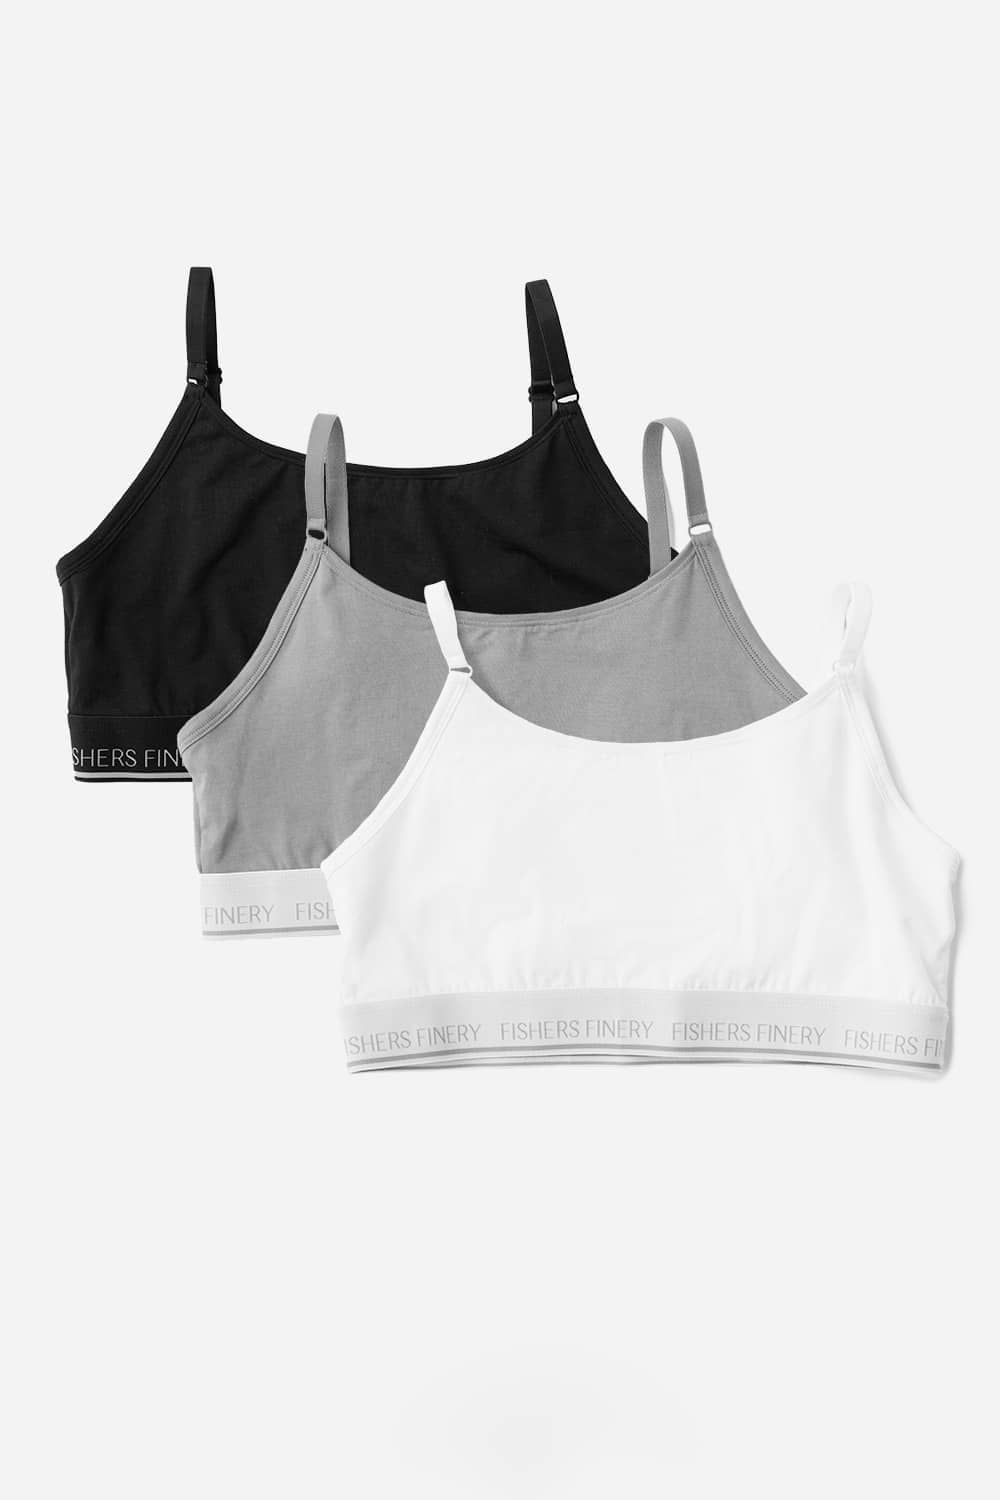 Women's Everyday Lightweight Adjustable Bralette Womens>Casual>Bra Fishers Finery Black-Sky Gray-White X-Small 3 Pack